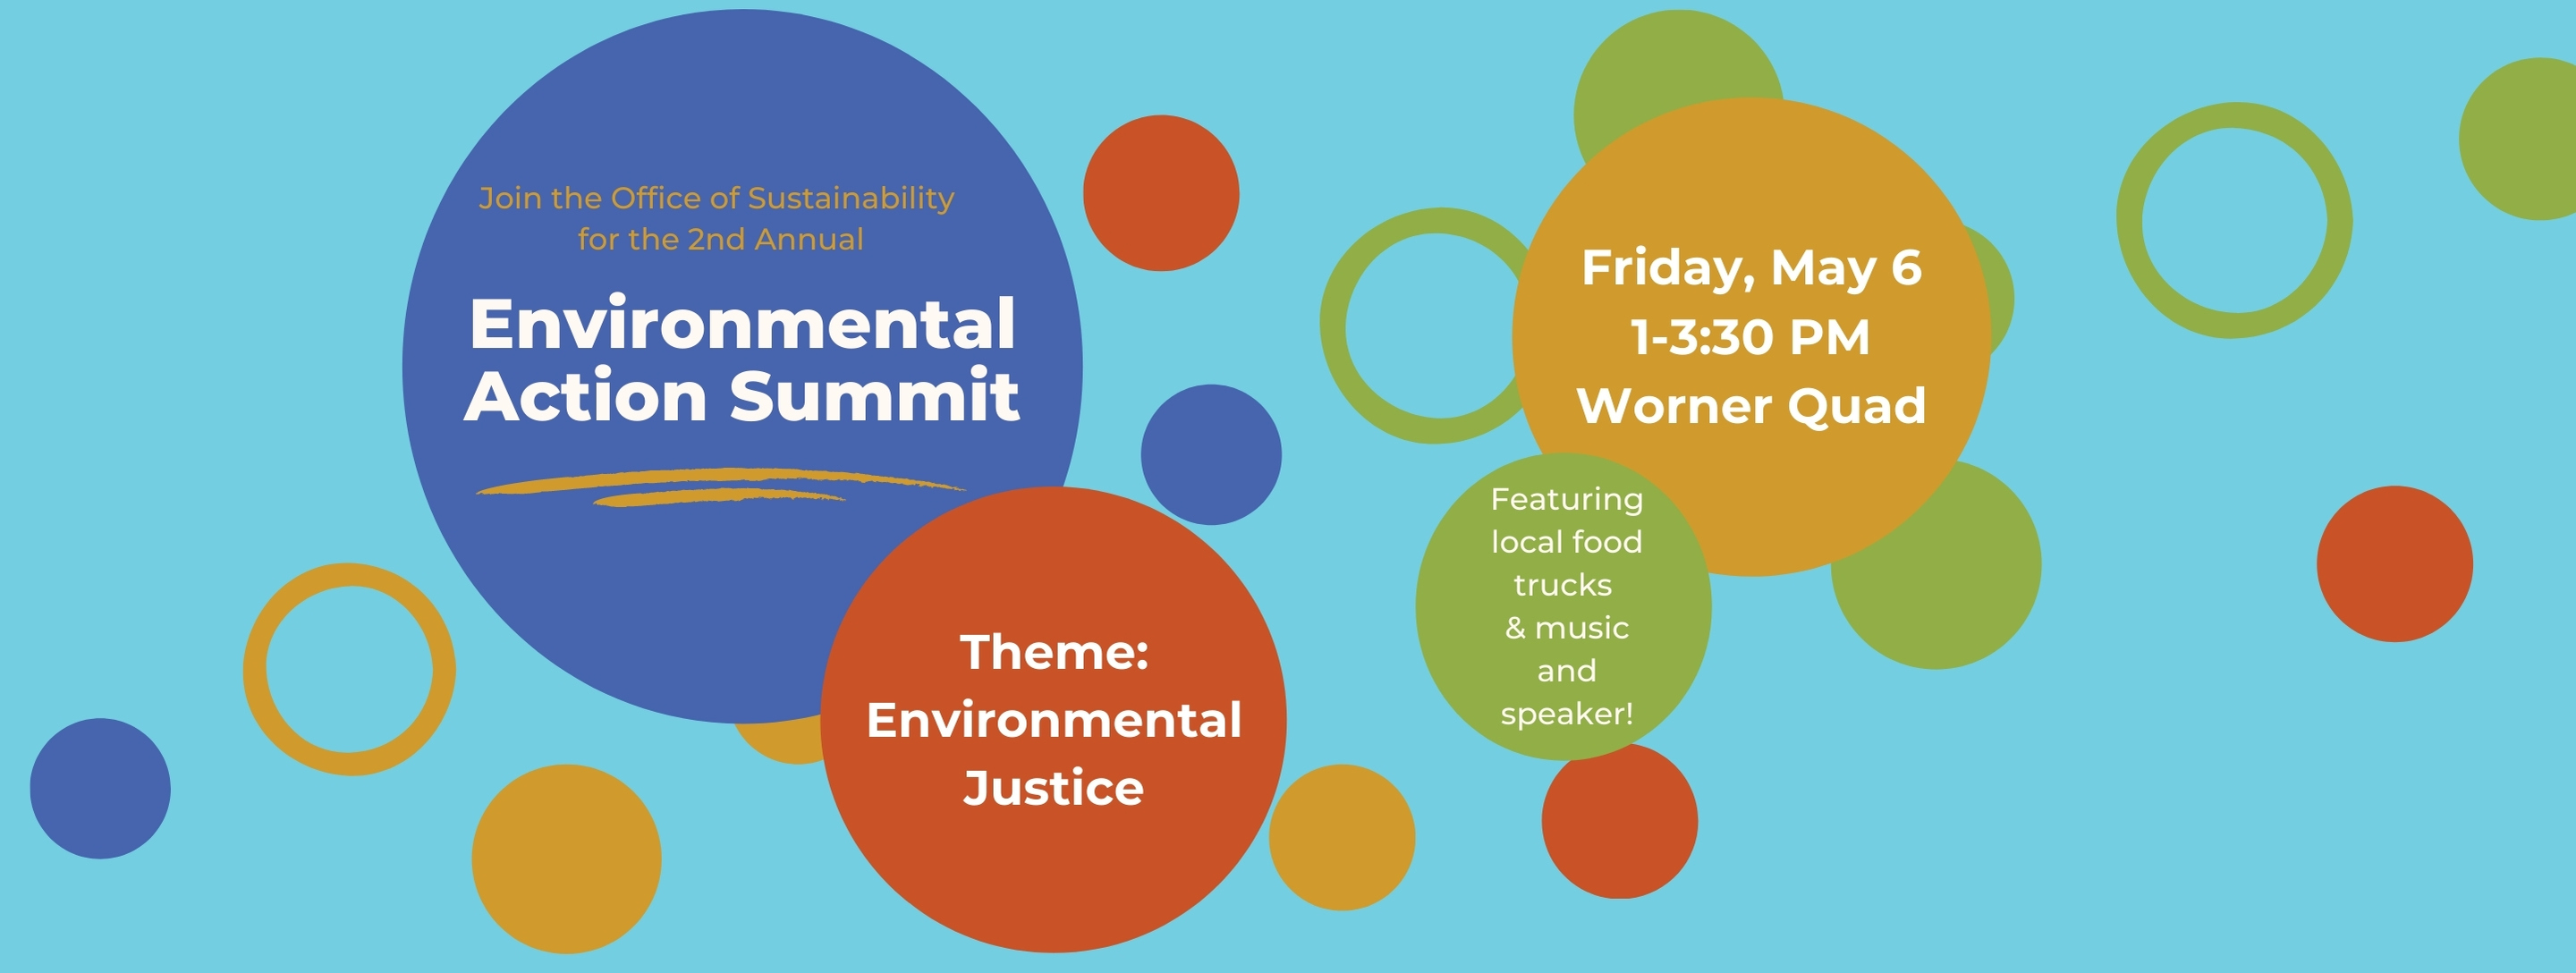 Join the Office of Sustainability for the Environmental Action Summit! Sign up .